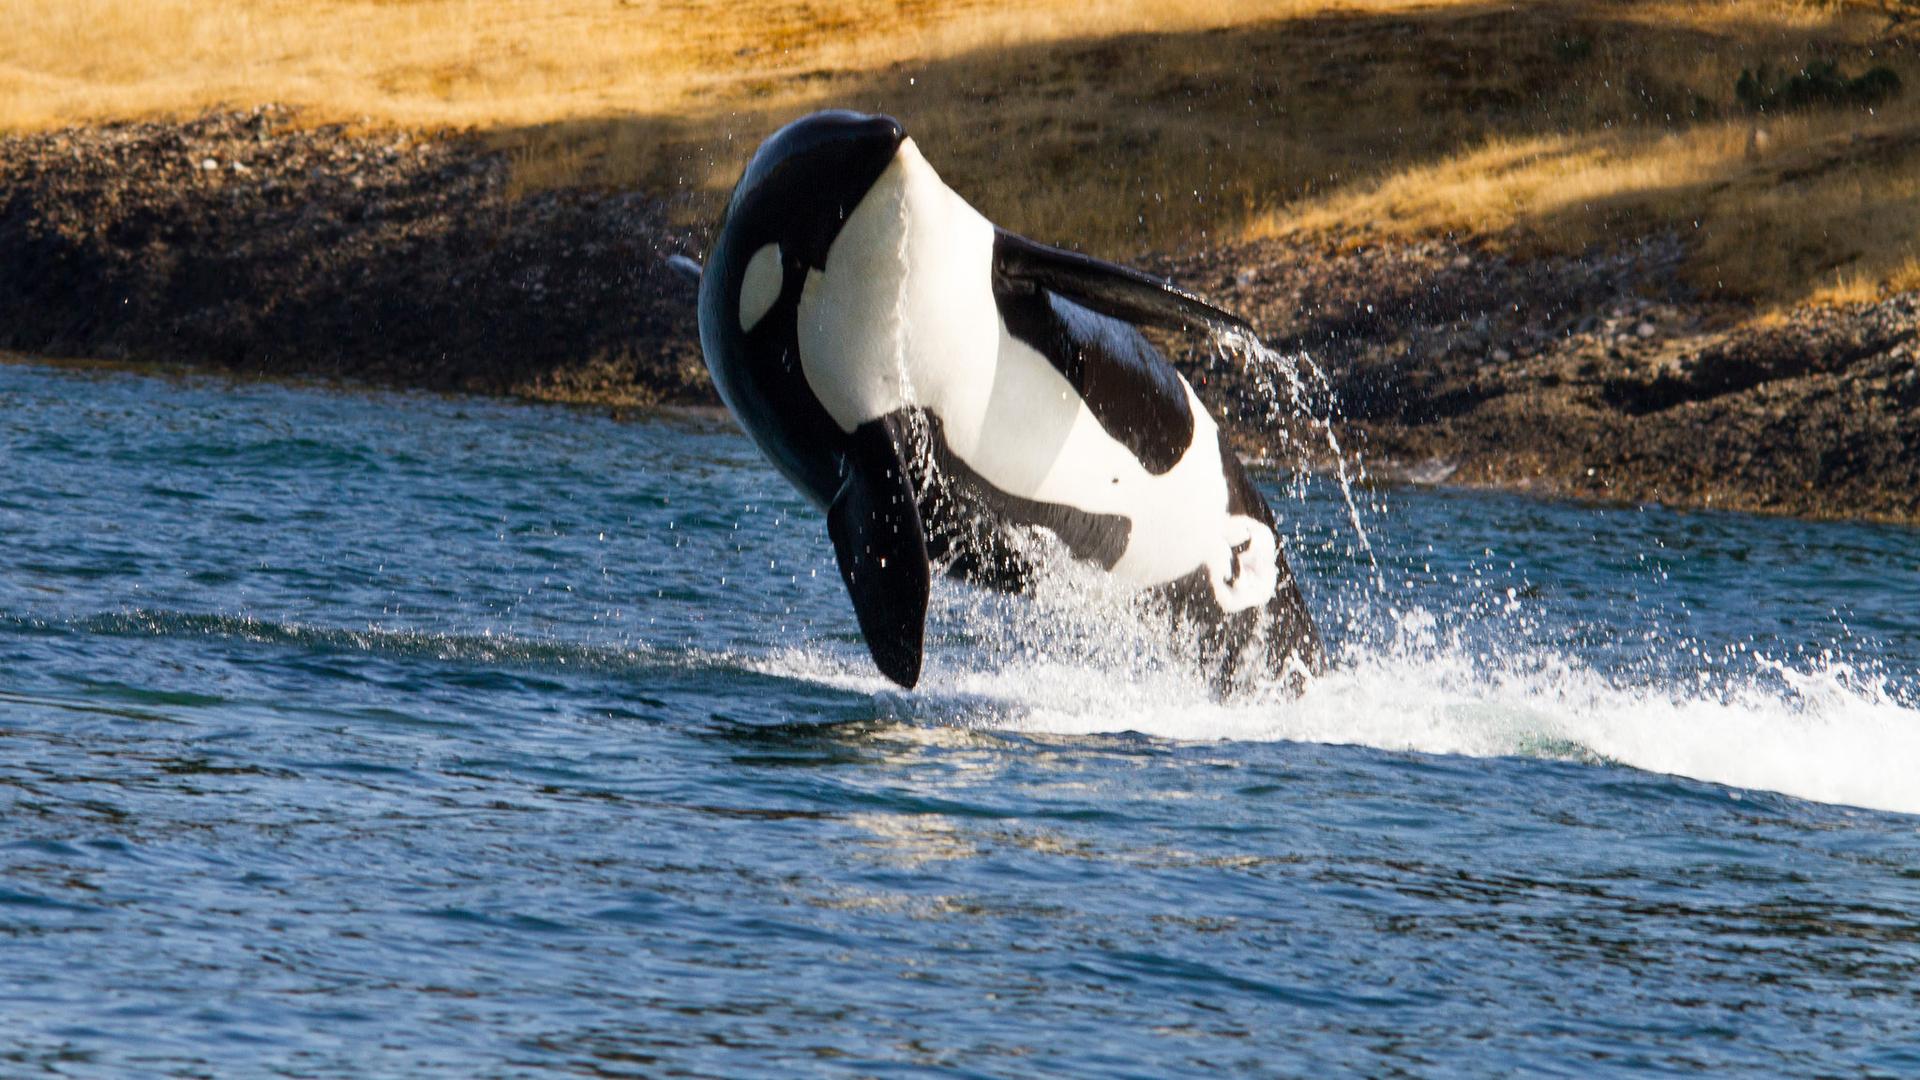 An orca whale breaching off the coast of British Columbia, Canada.